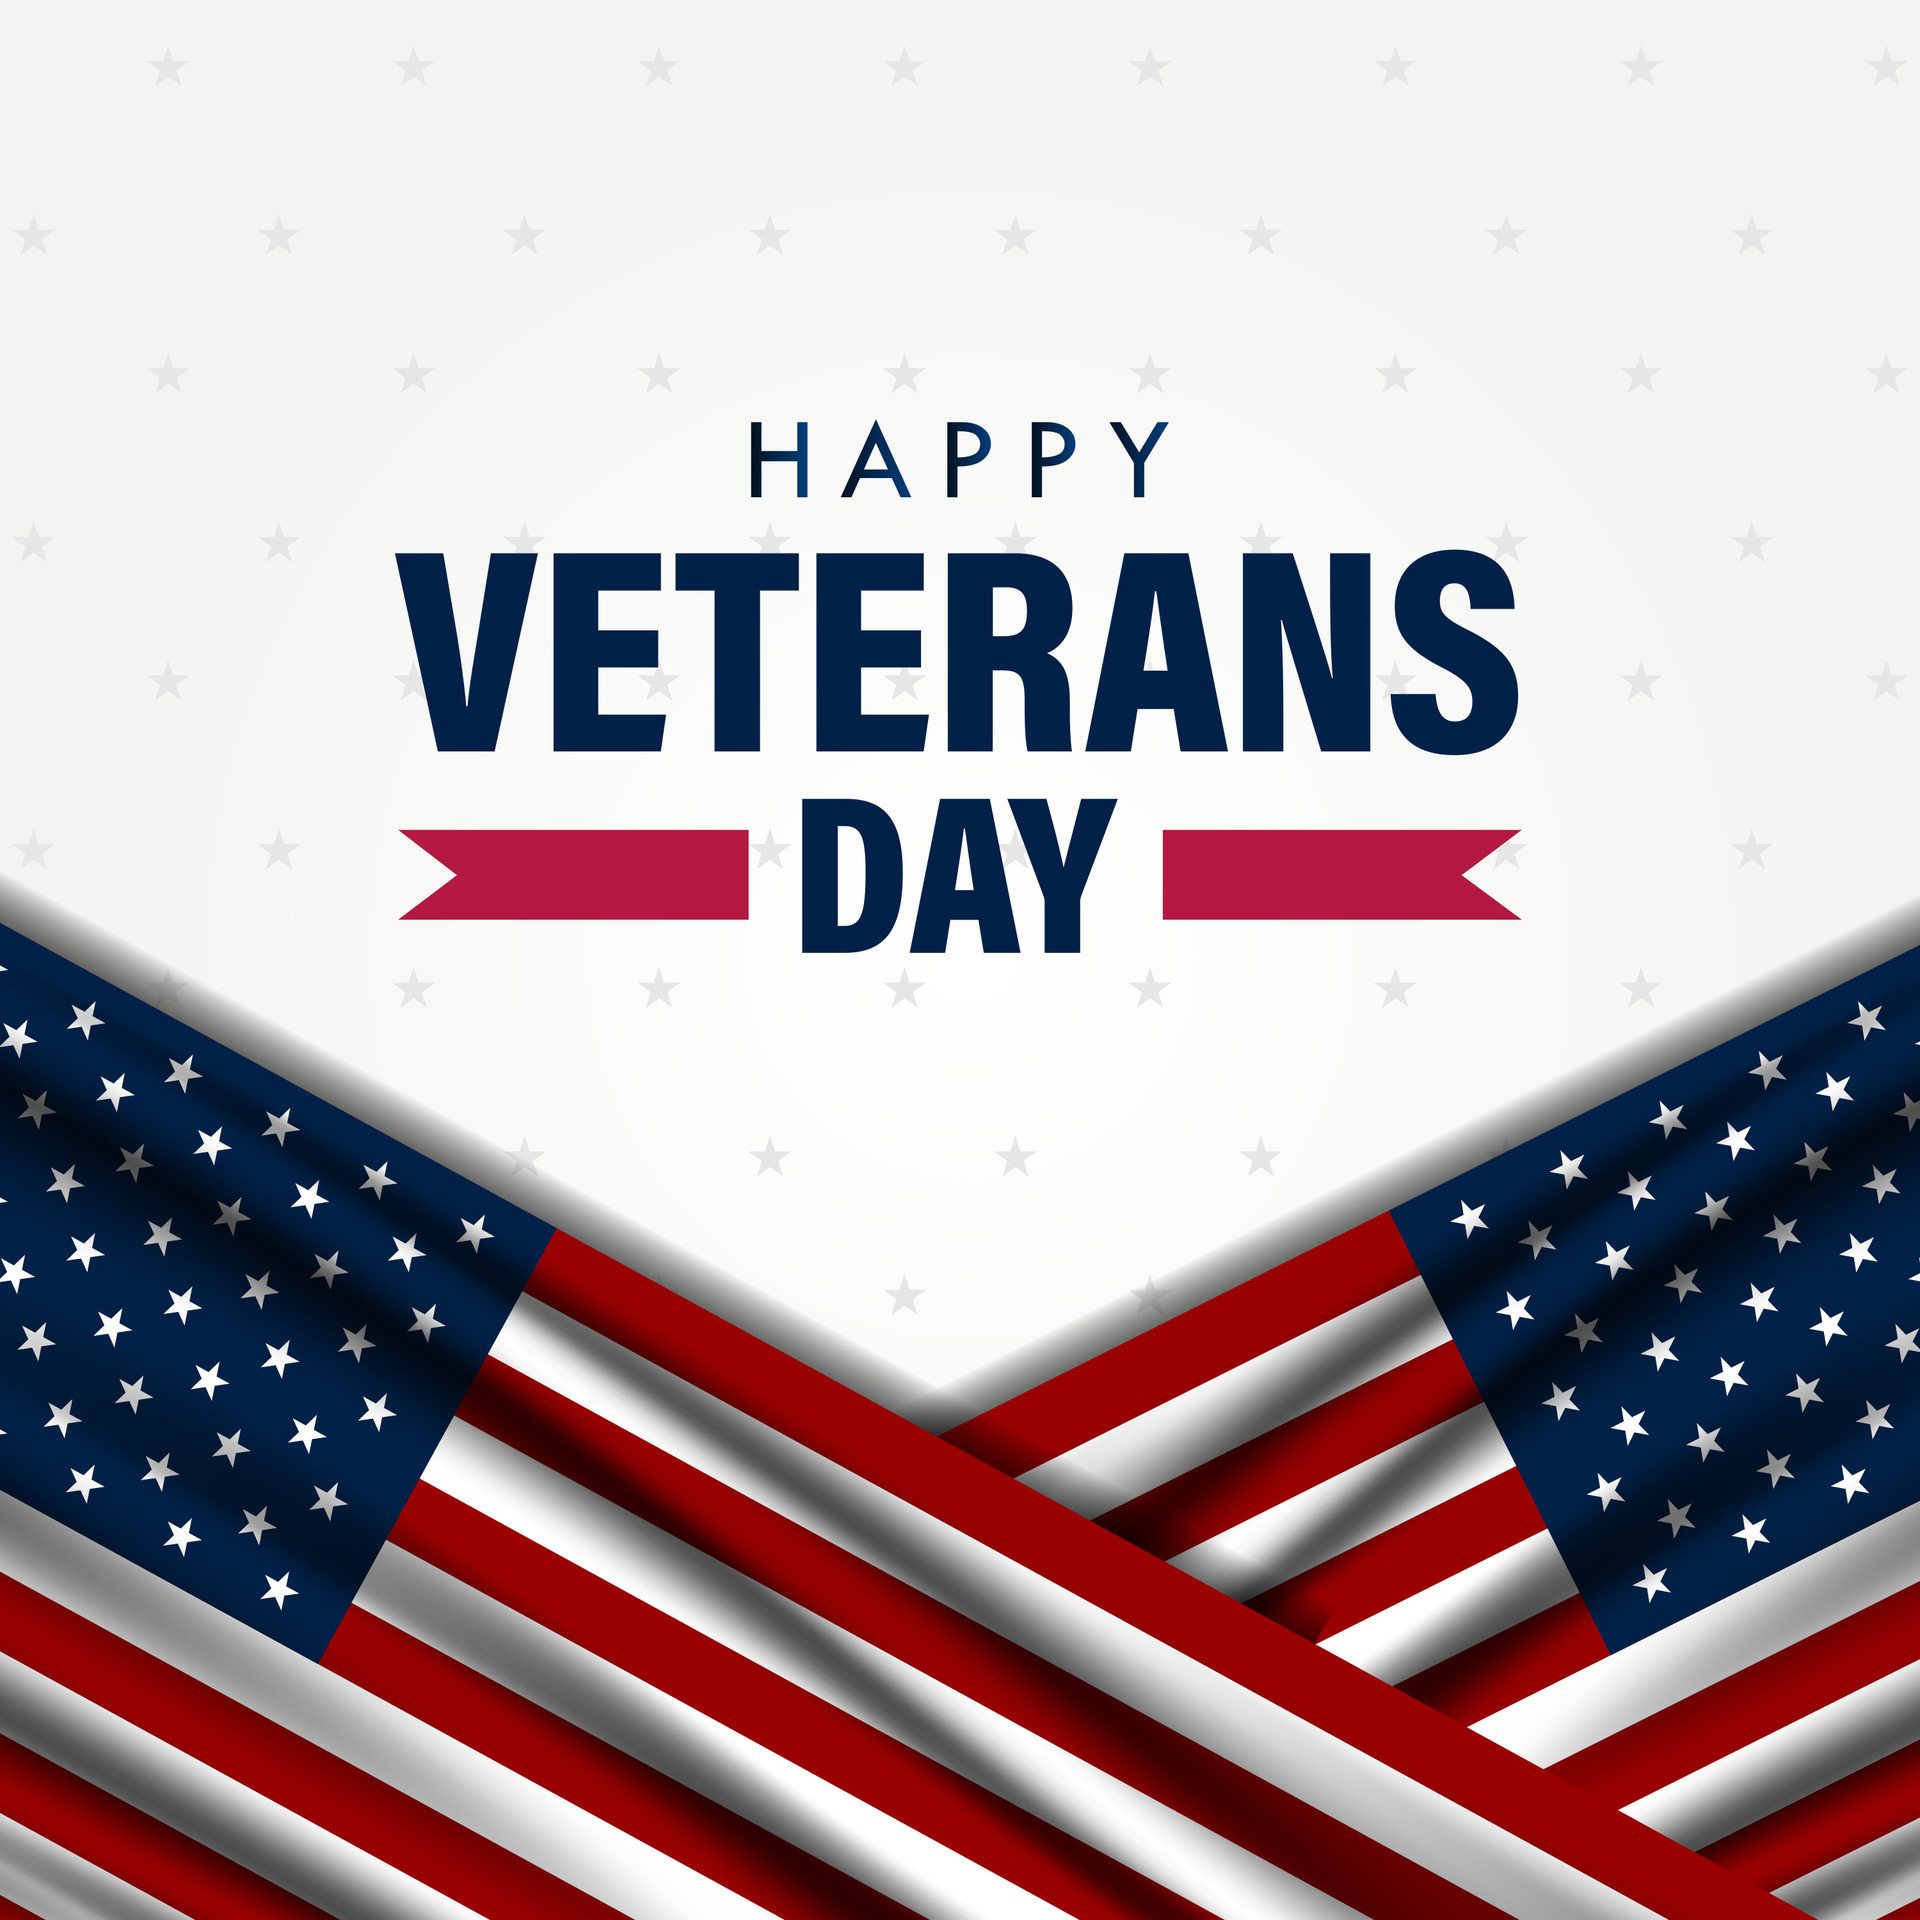 Happy veterans day on a white background Vector Image